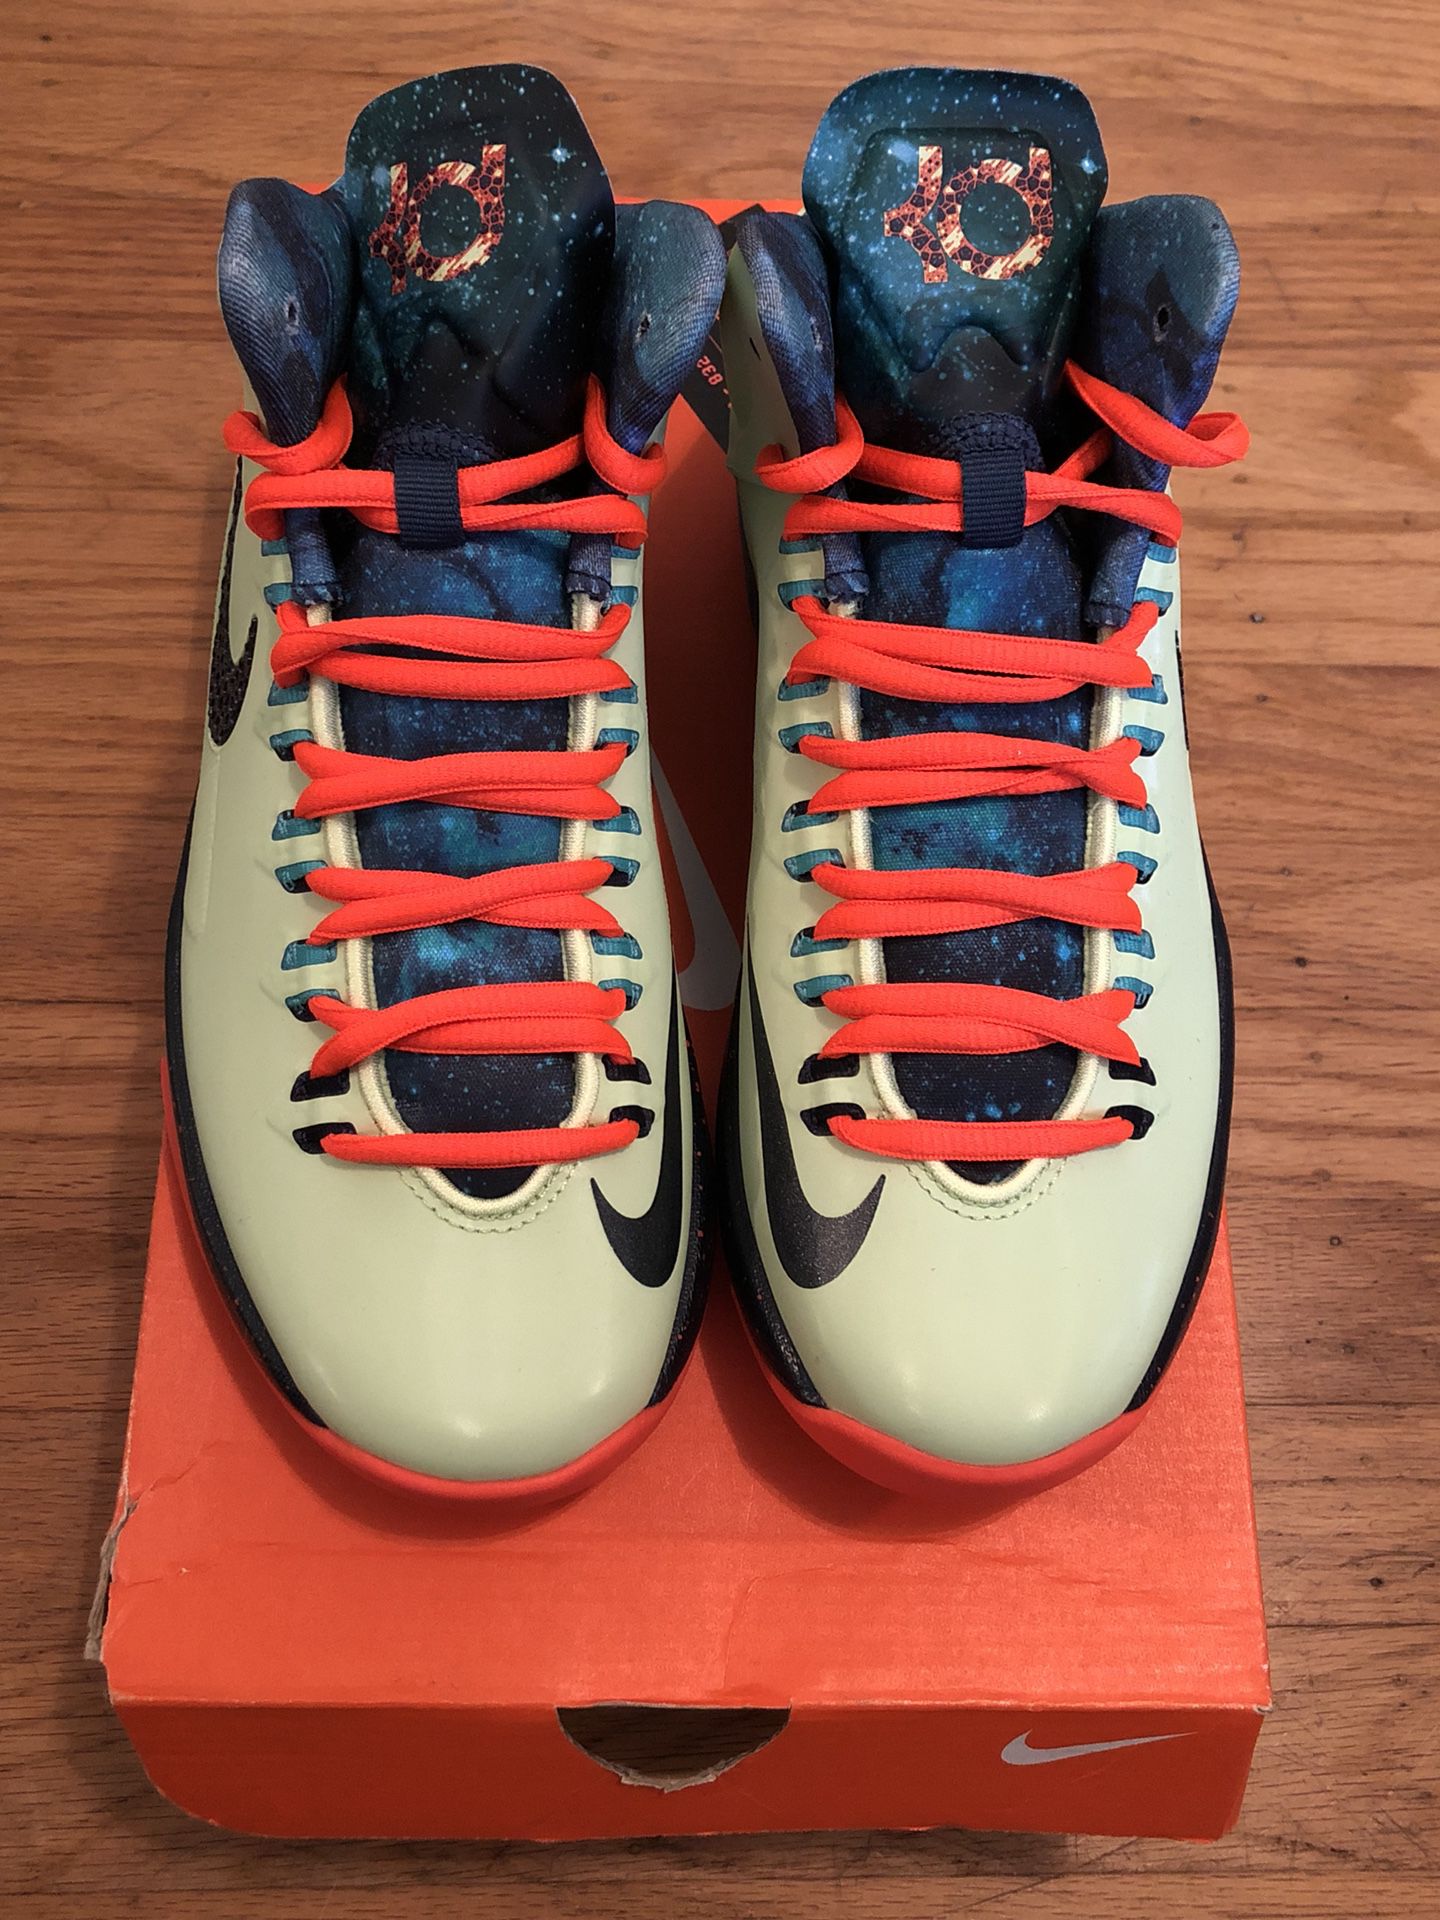 Nike KD “All Star” 5 Shoes, Size 5Y